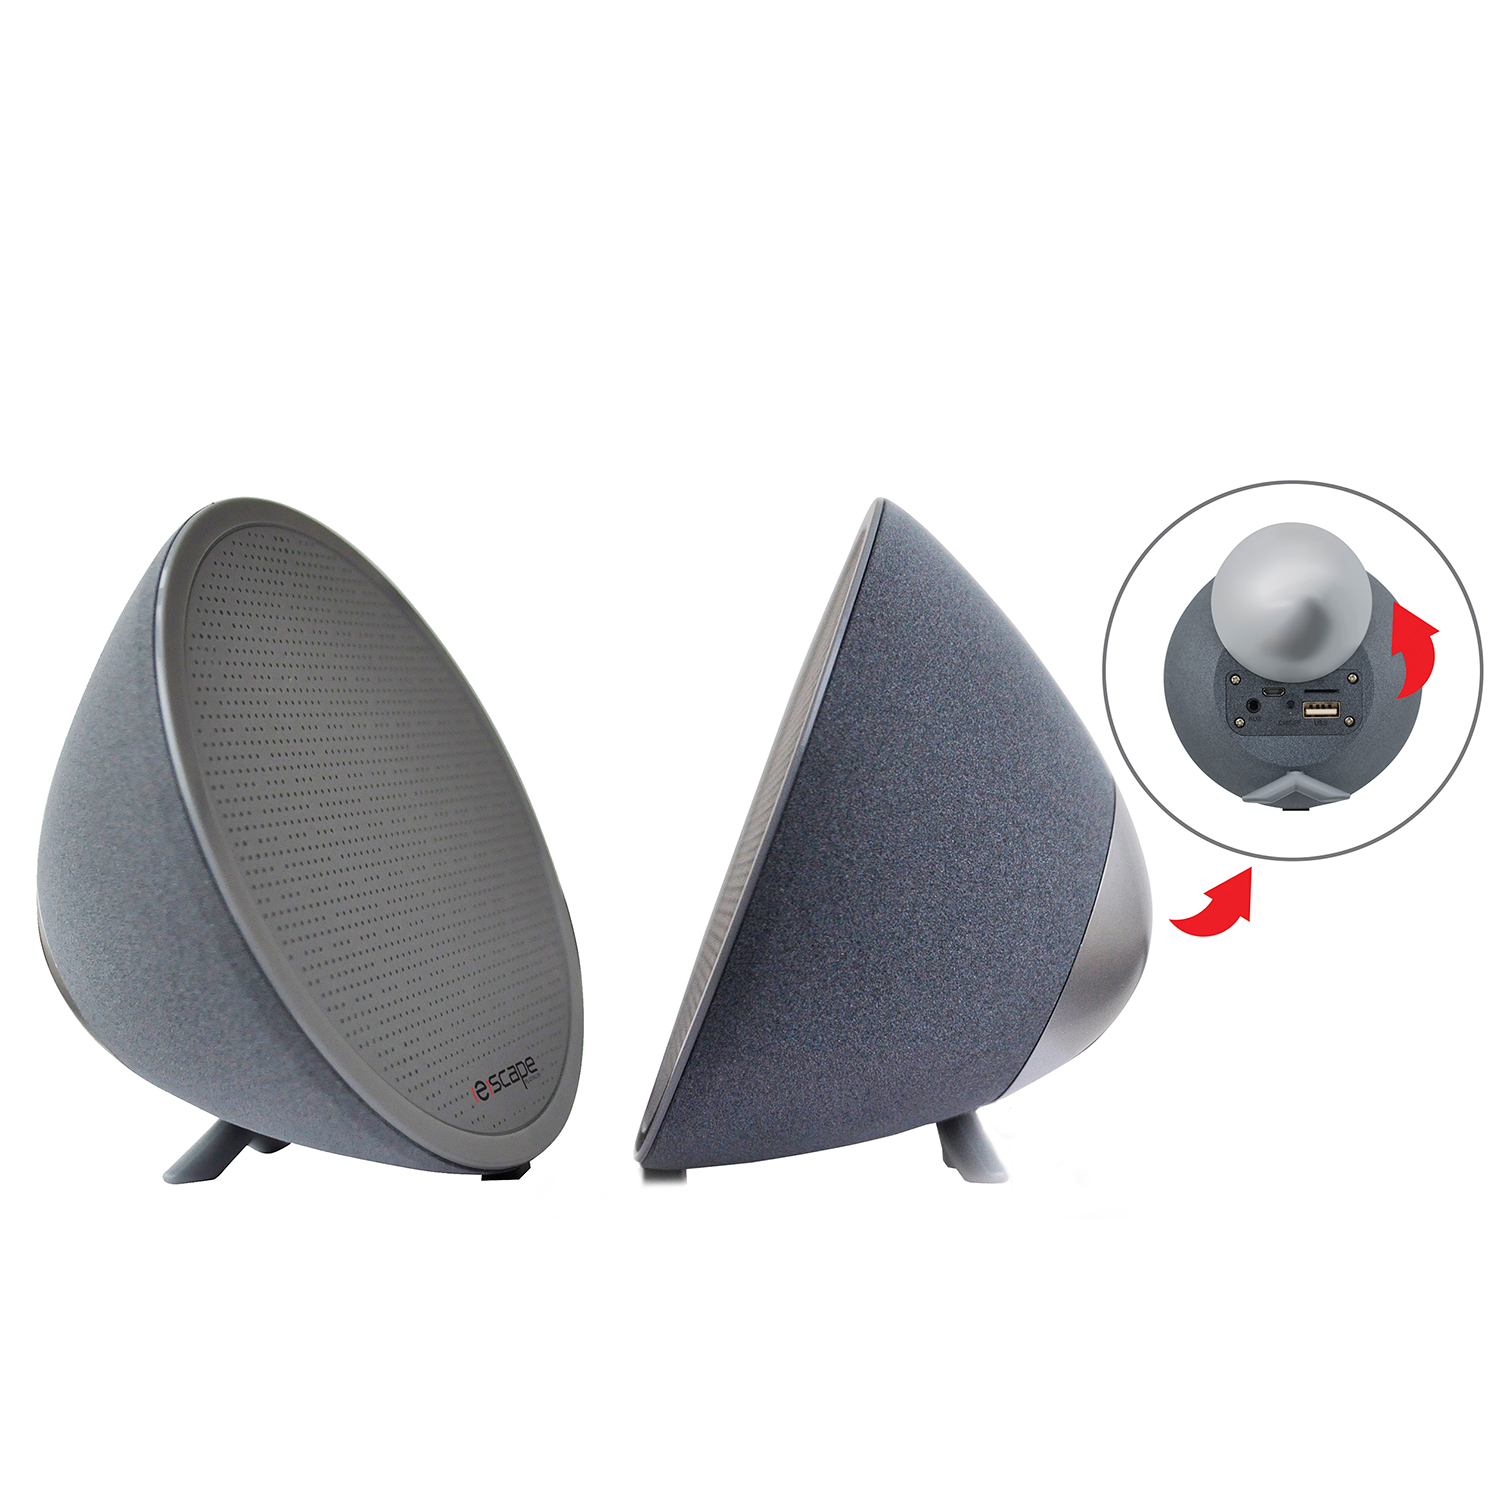 Escape - 2 Wireless stereo speakers with microphone